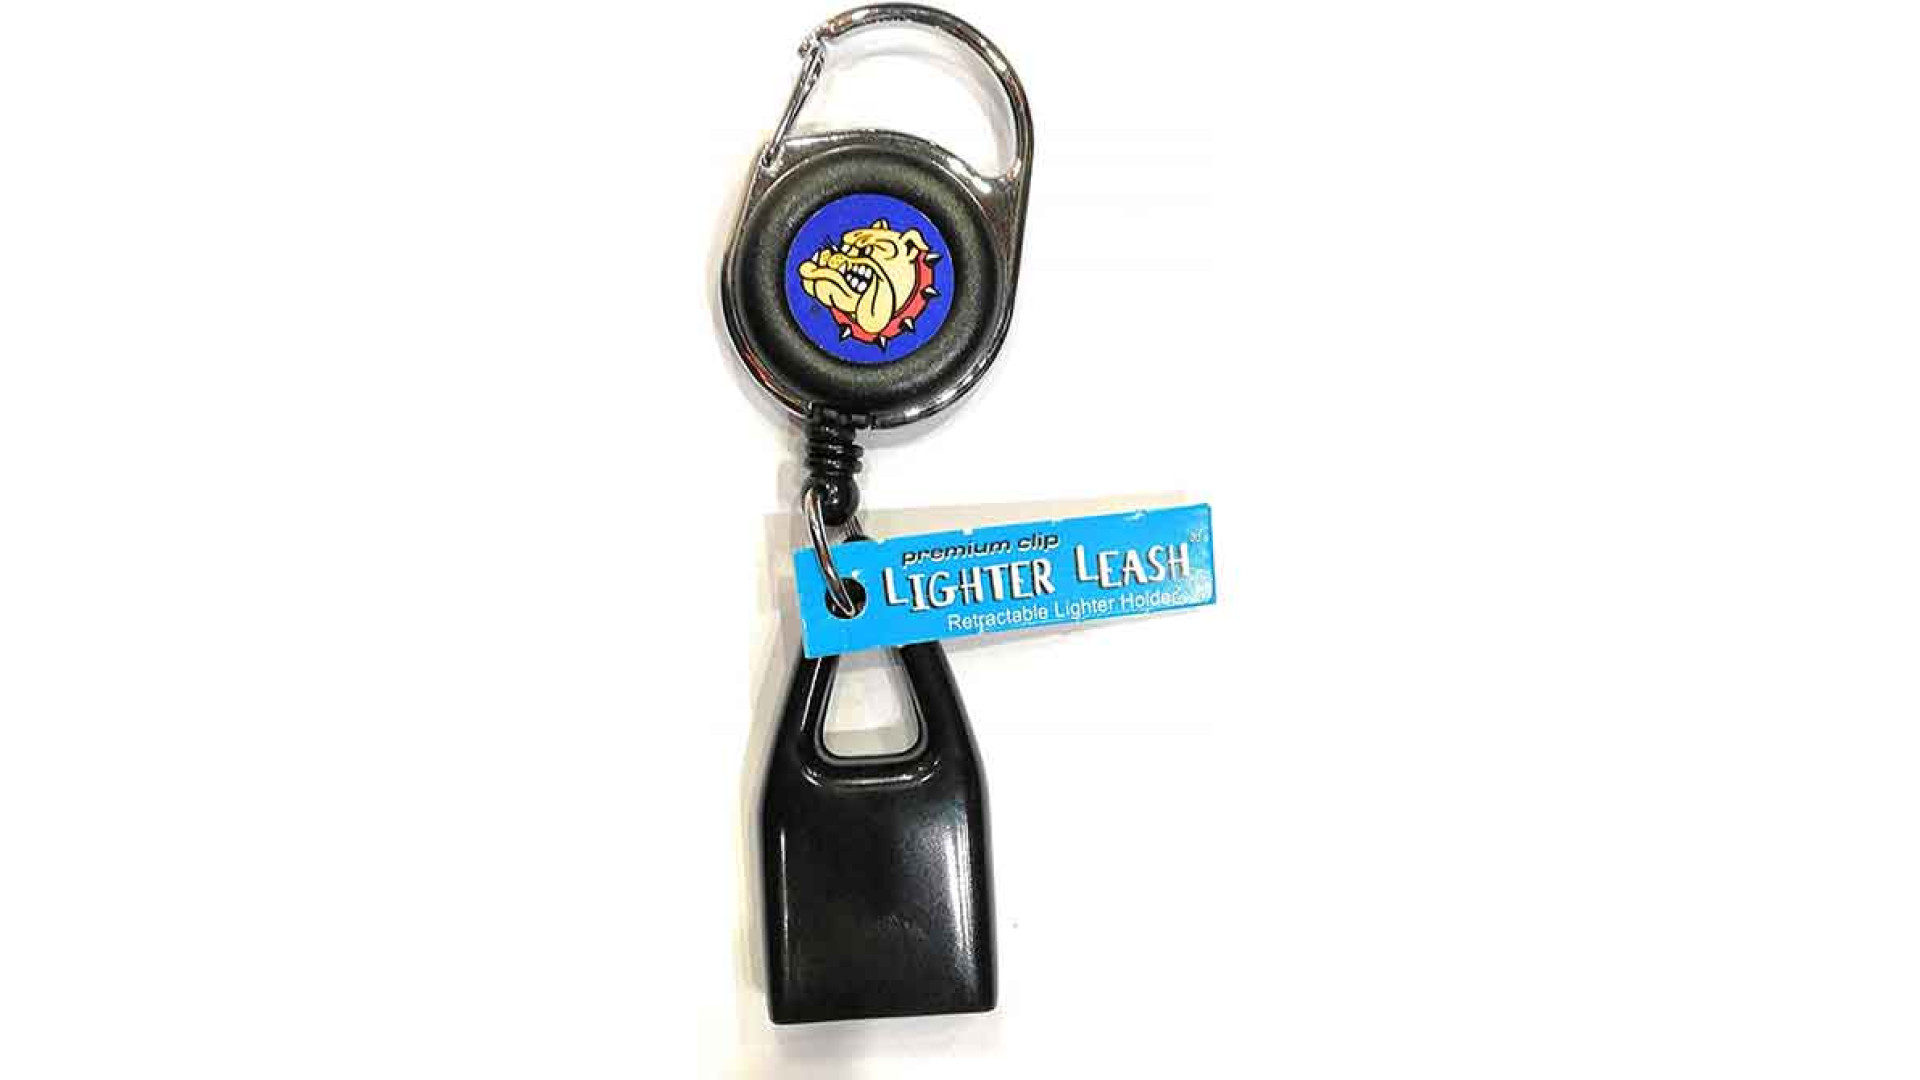 https://www.ckbproducts.com/image/cache/catalog/New%20Blog%20Images/what-to-look-for-when-customizing-a-lighter-leash-1920x1080.jpeg